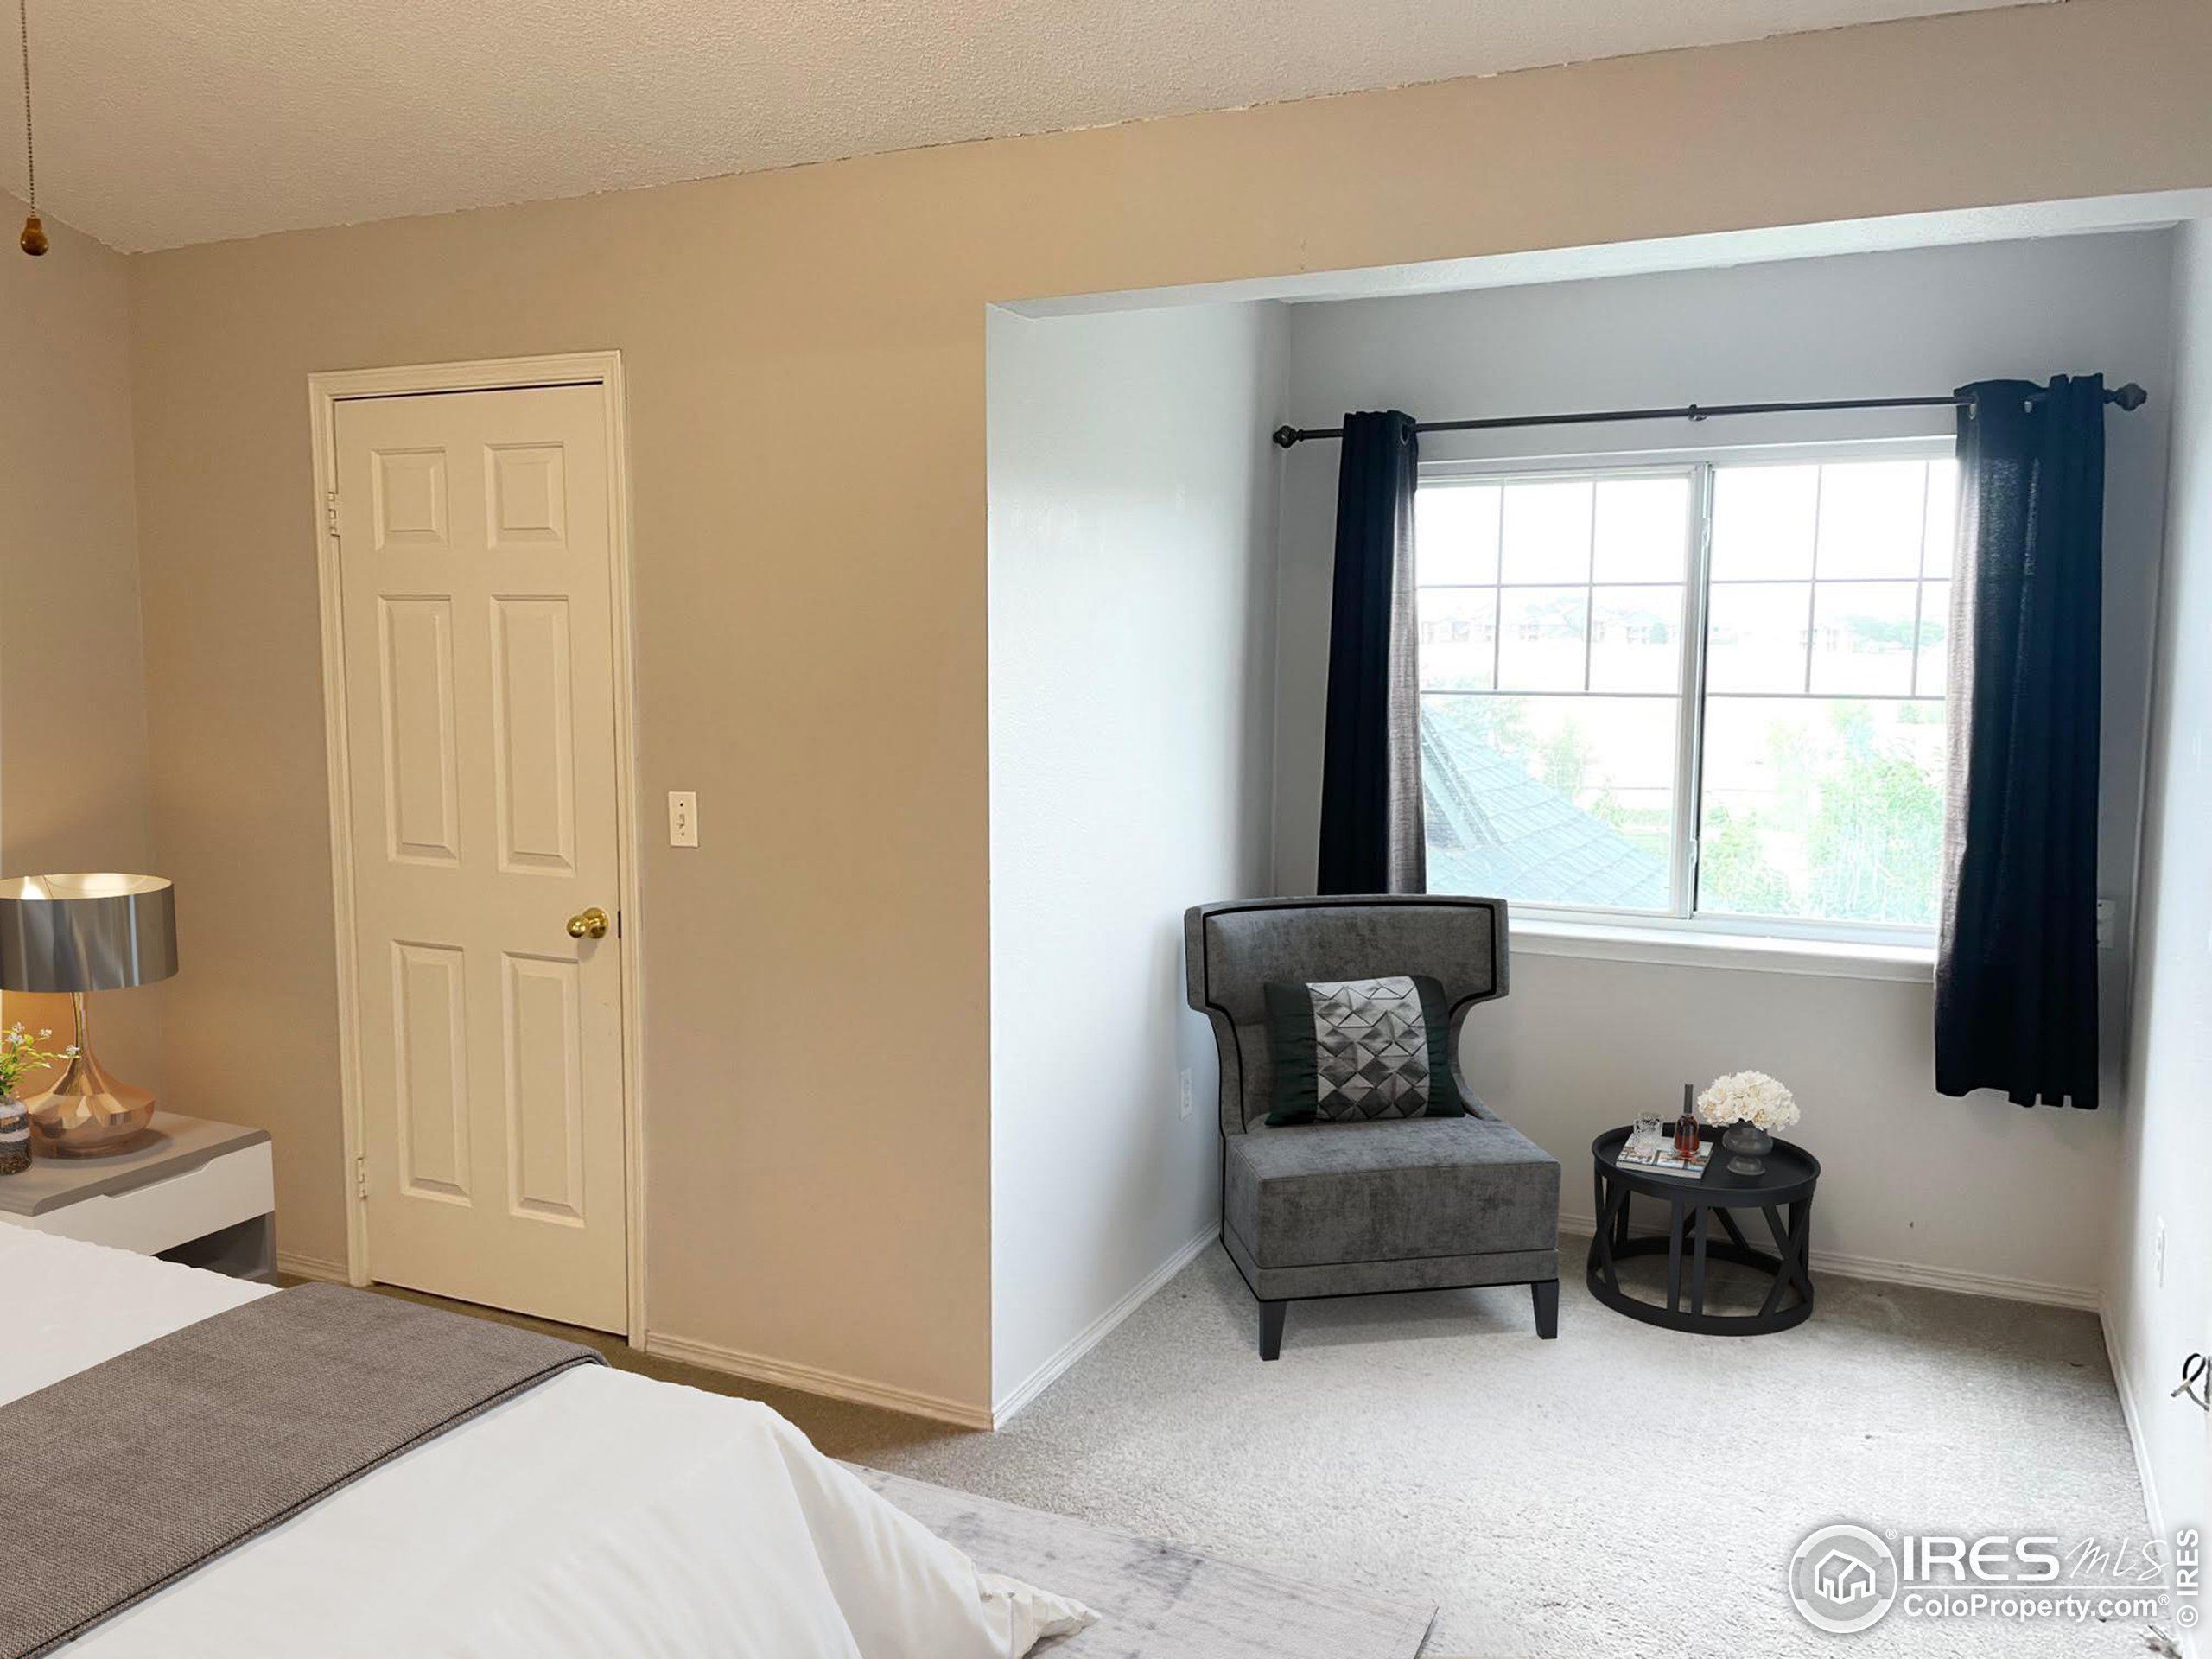 Primary - Good sized room with walk in closet